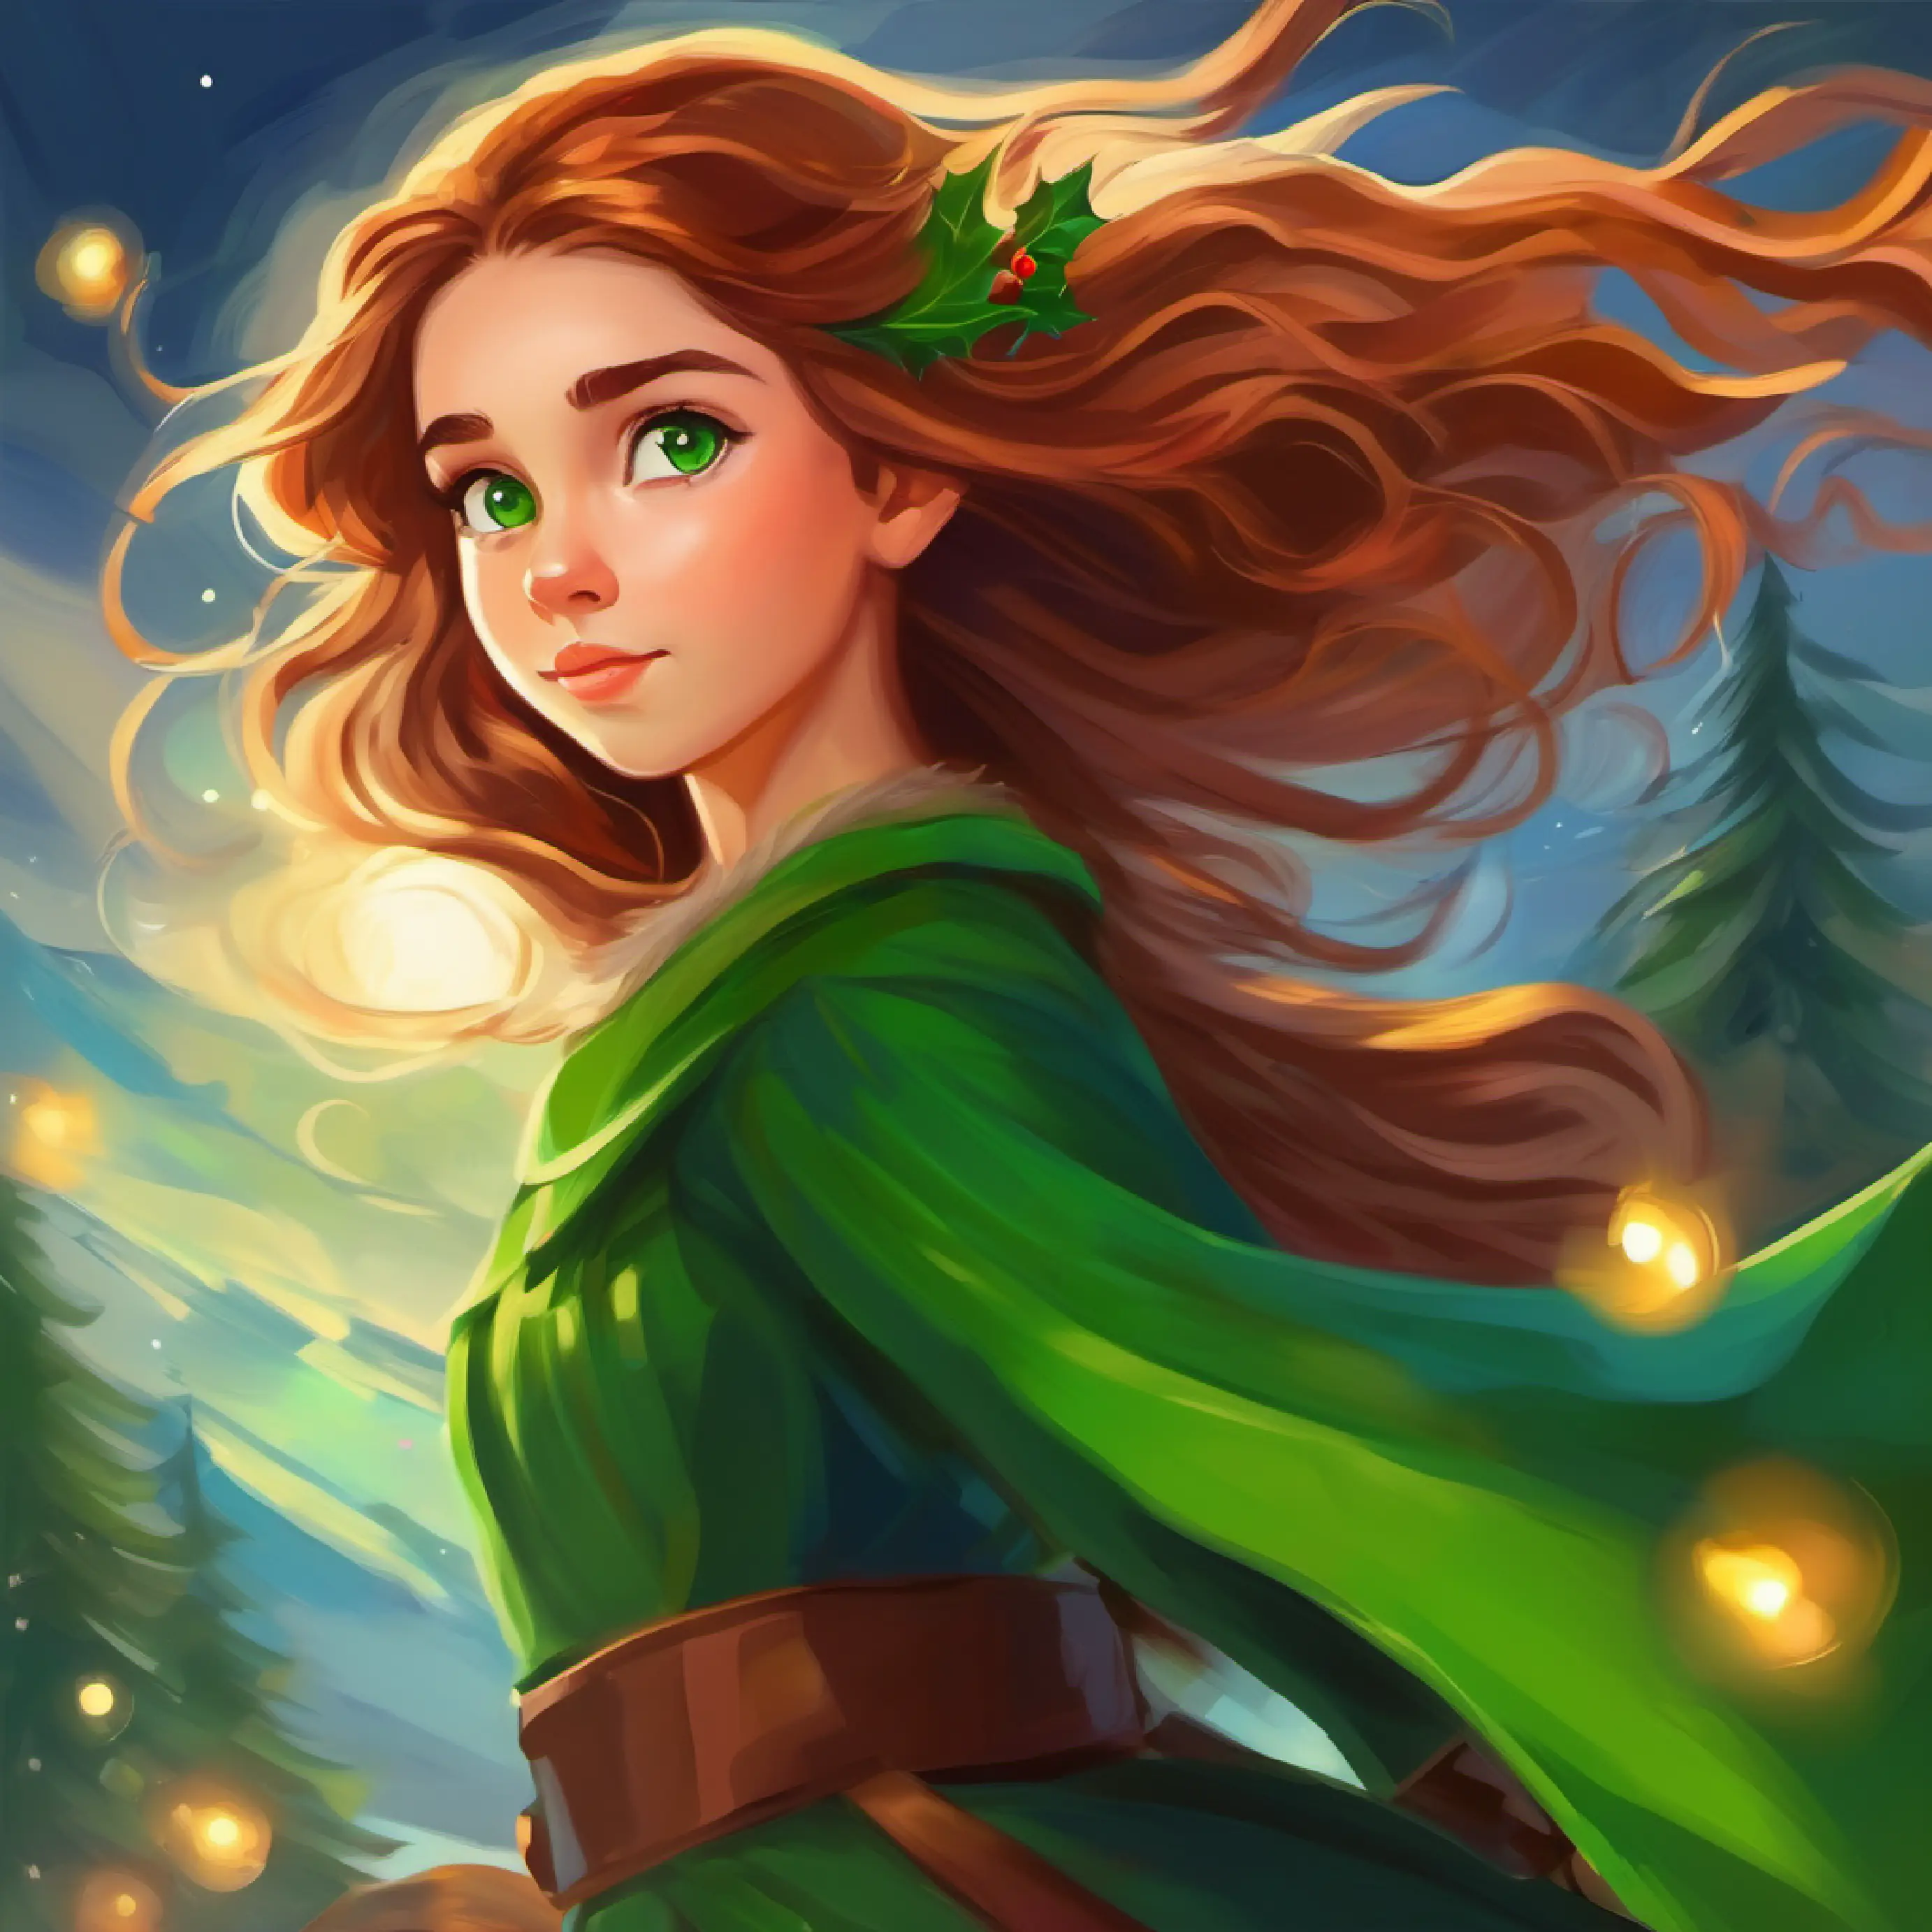 Brave young girl with flowing chestnut hair and bright green eyes gains control over the wind and amazes everyone.